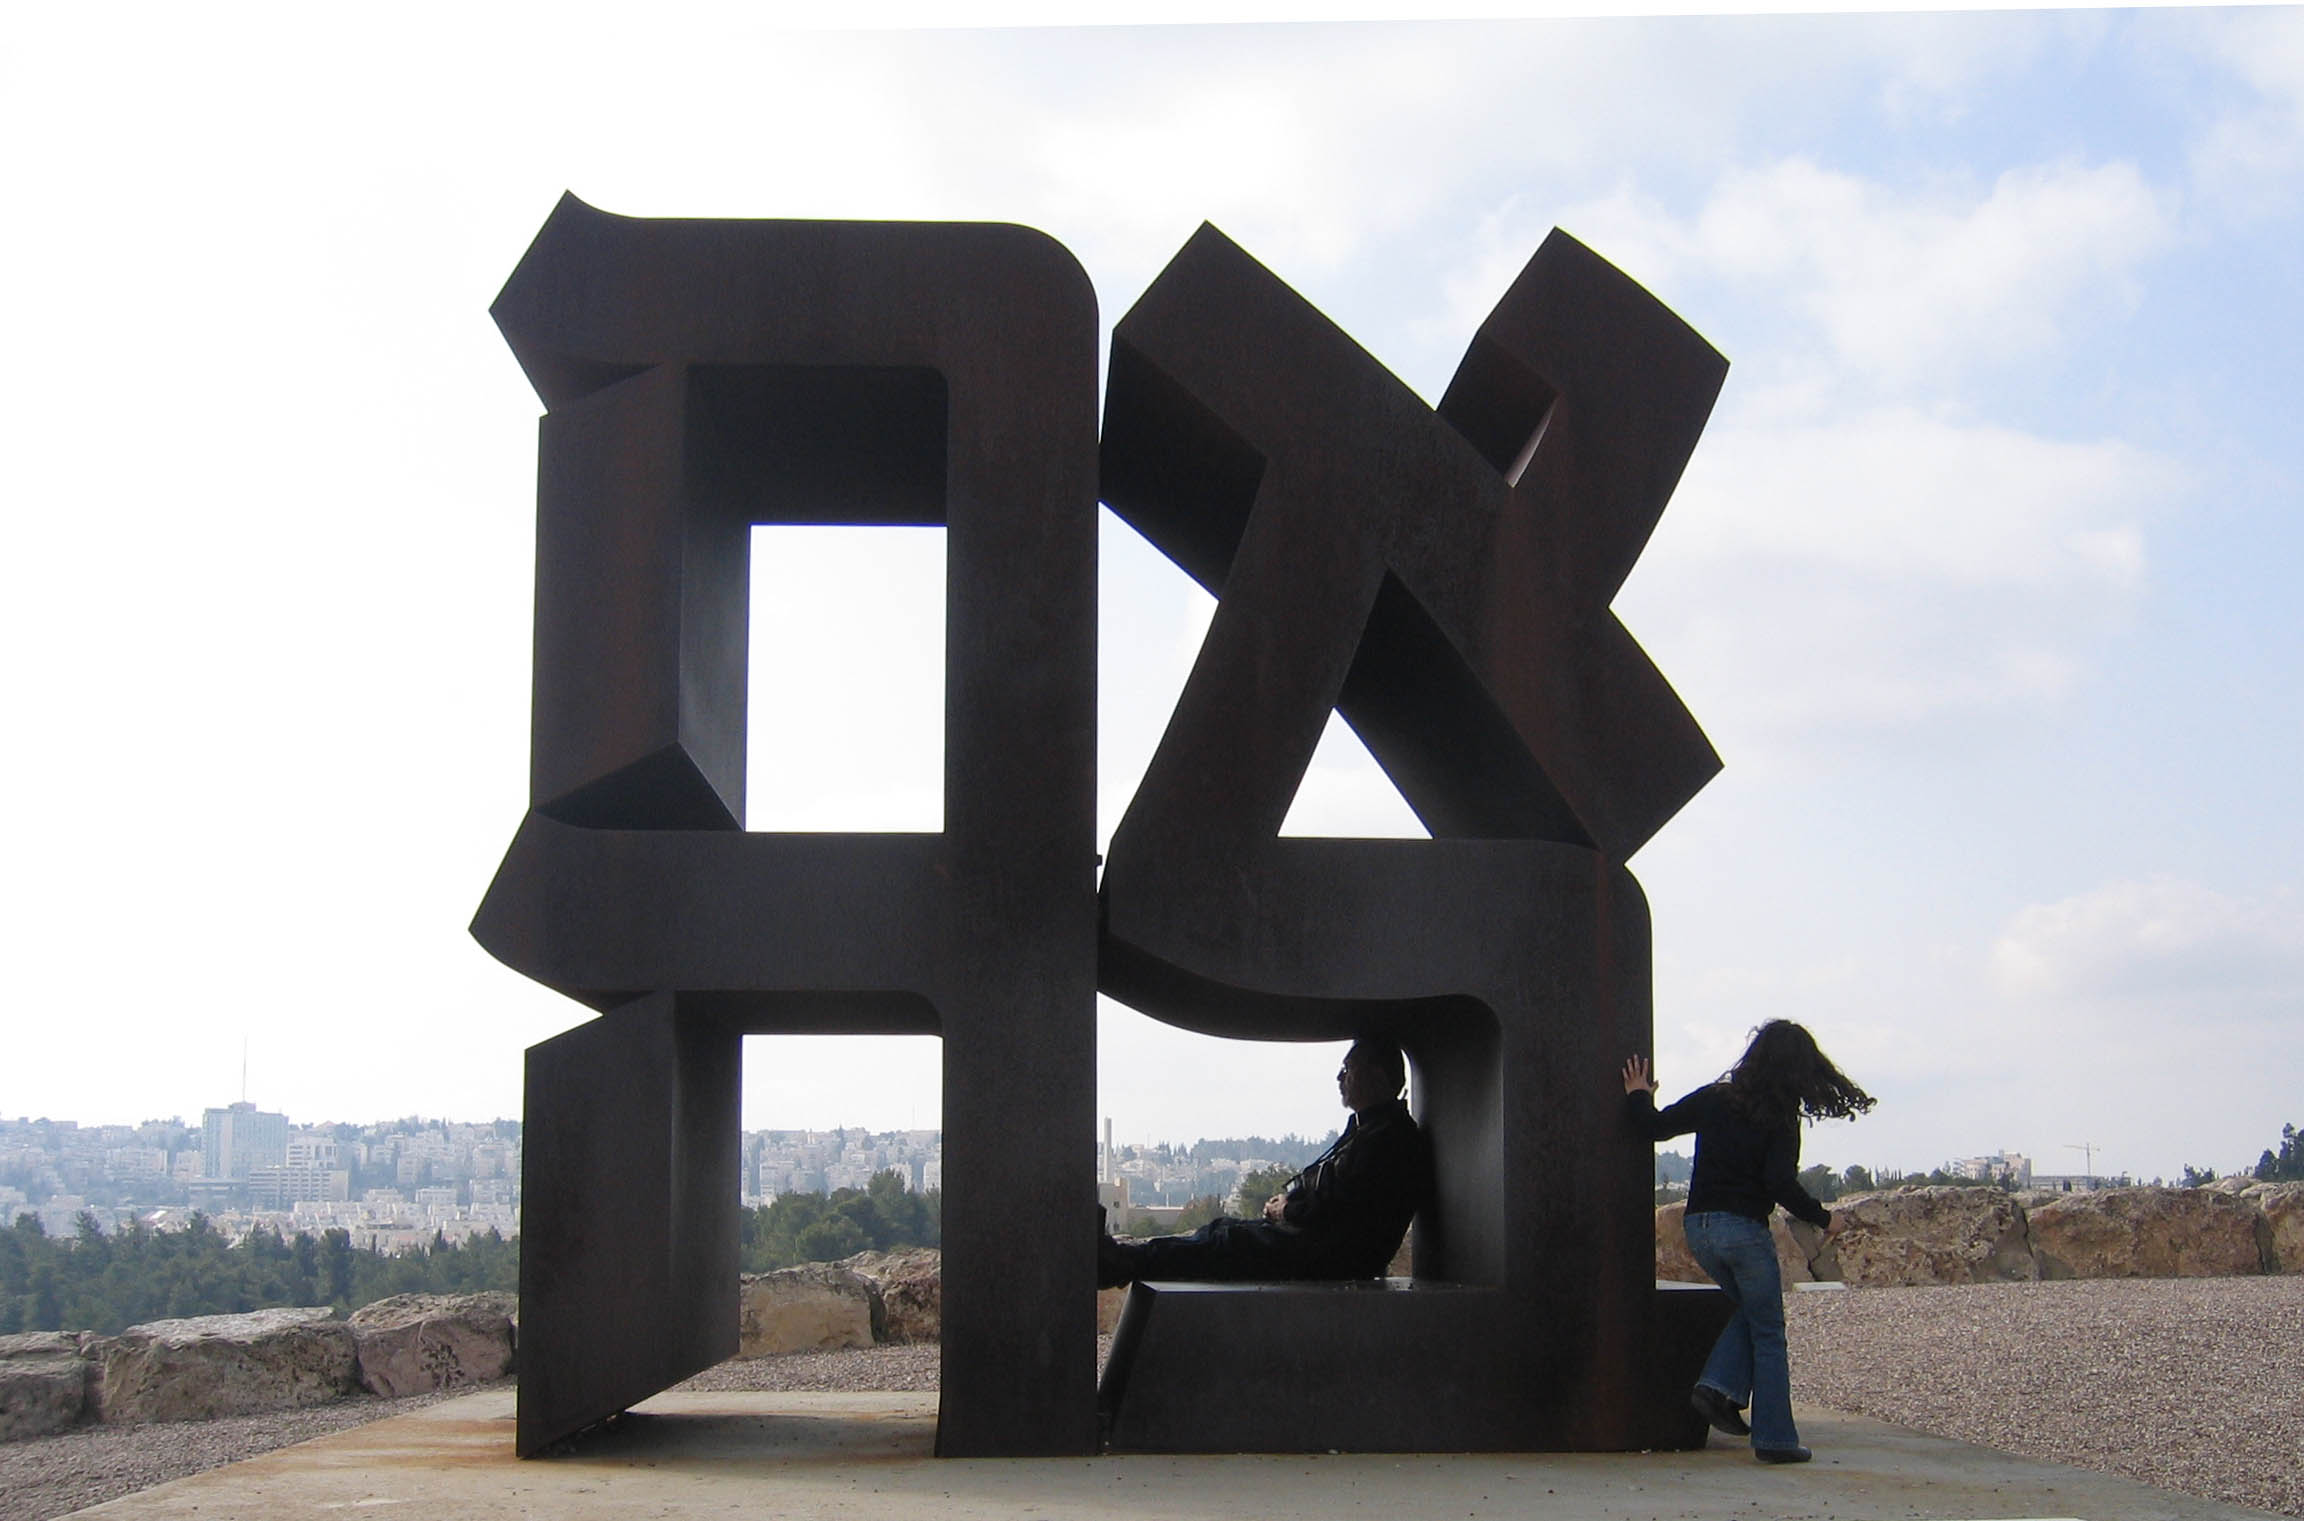 Tu B'Av is all about celebrating ahava -- love. | <a href="https://commons.wikimedia.org/wiki/File:Ahava.jpg">Sculpture by Robert Indiana, American, born 1928 [GFDL or CC BY-SA 4.0-3.0-2.5-2.0-1.0], via Wikimedia Commons</a>